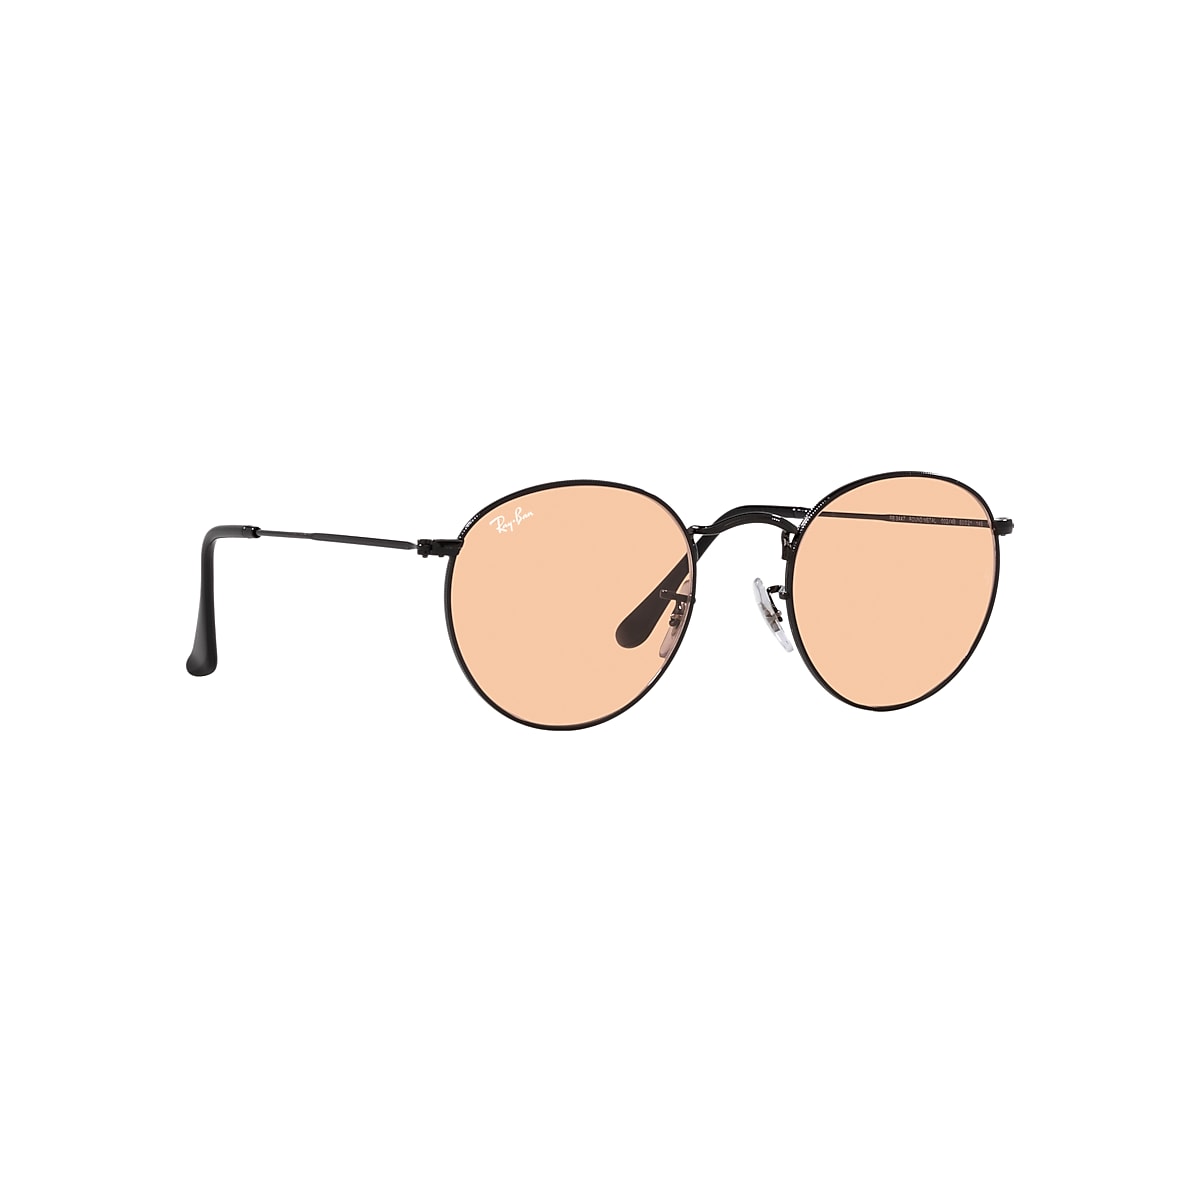 ROUND METAL WASHED LENSES RB3447-